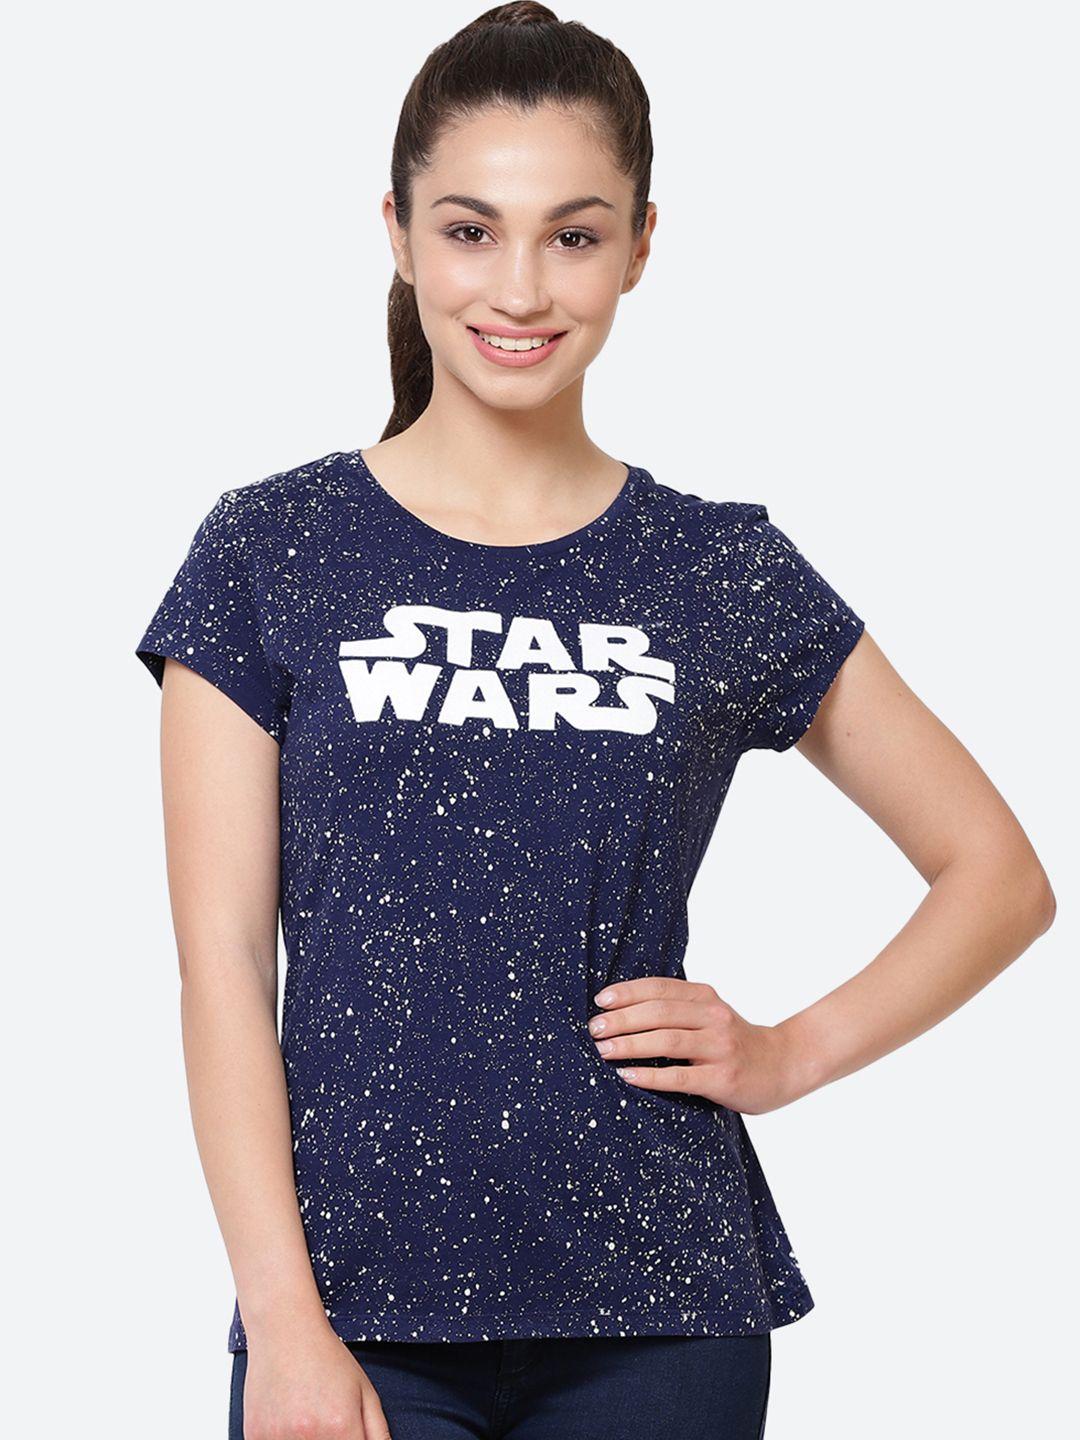 free authority star wars featured navy blue tshirt for women